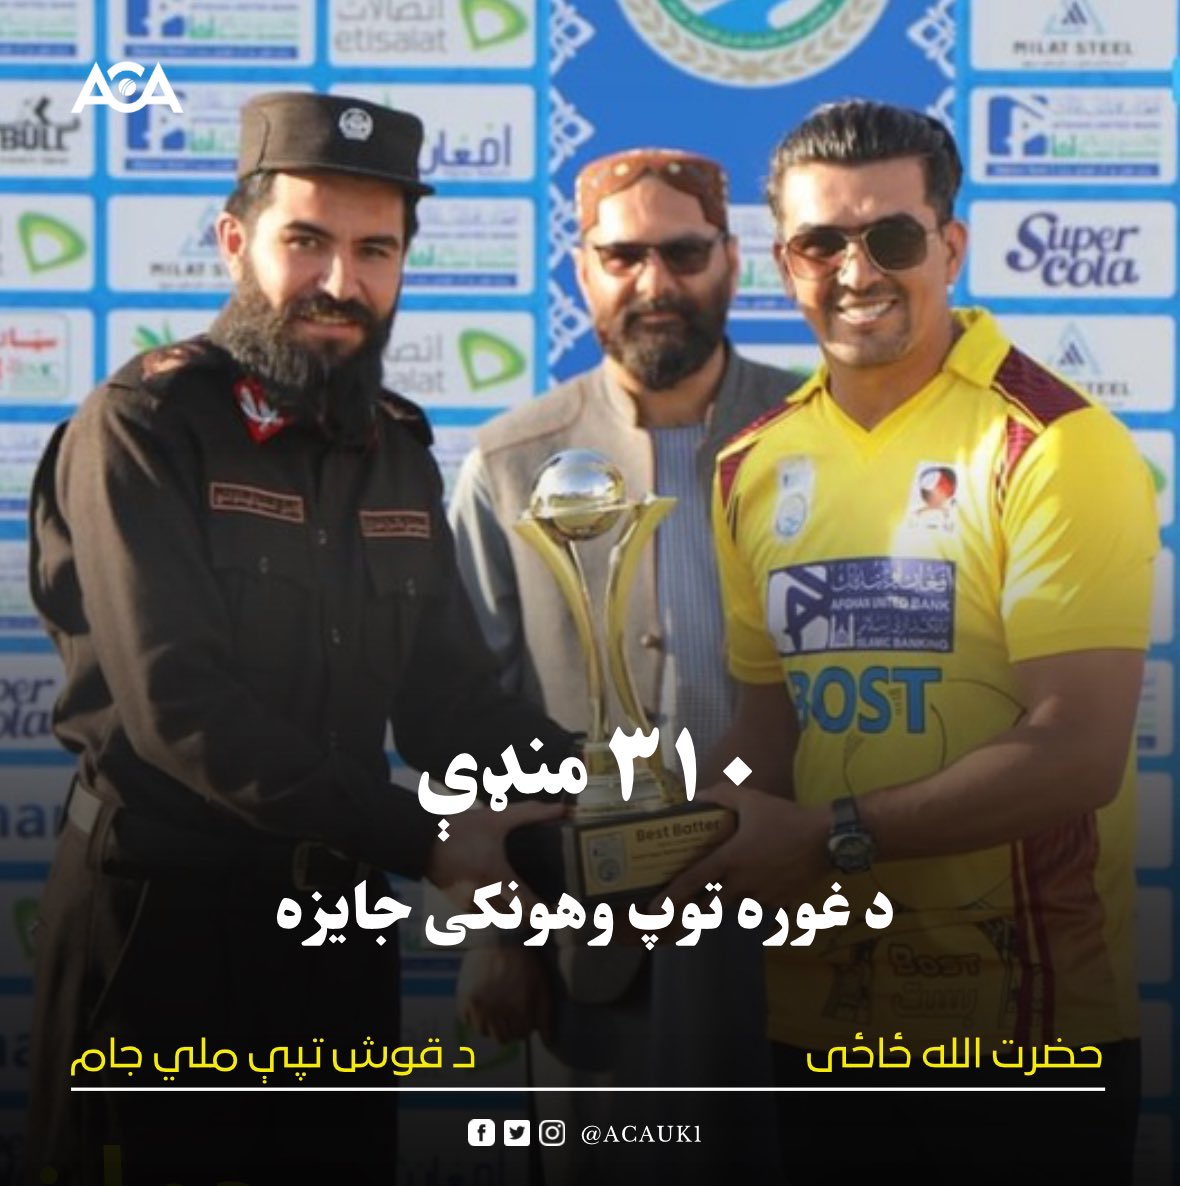 310 runs at a strike rate of 158, @zazai_3 was awarded the best batter of Qosh Tepa National Cup award 🥇 #AfghanCricket